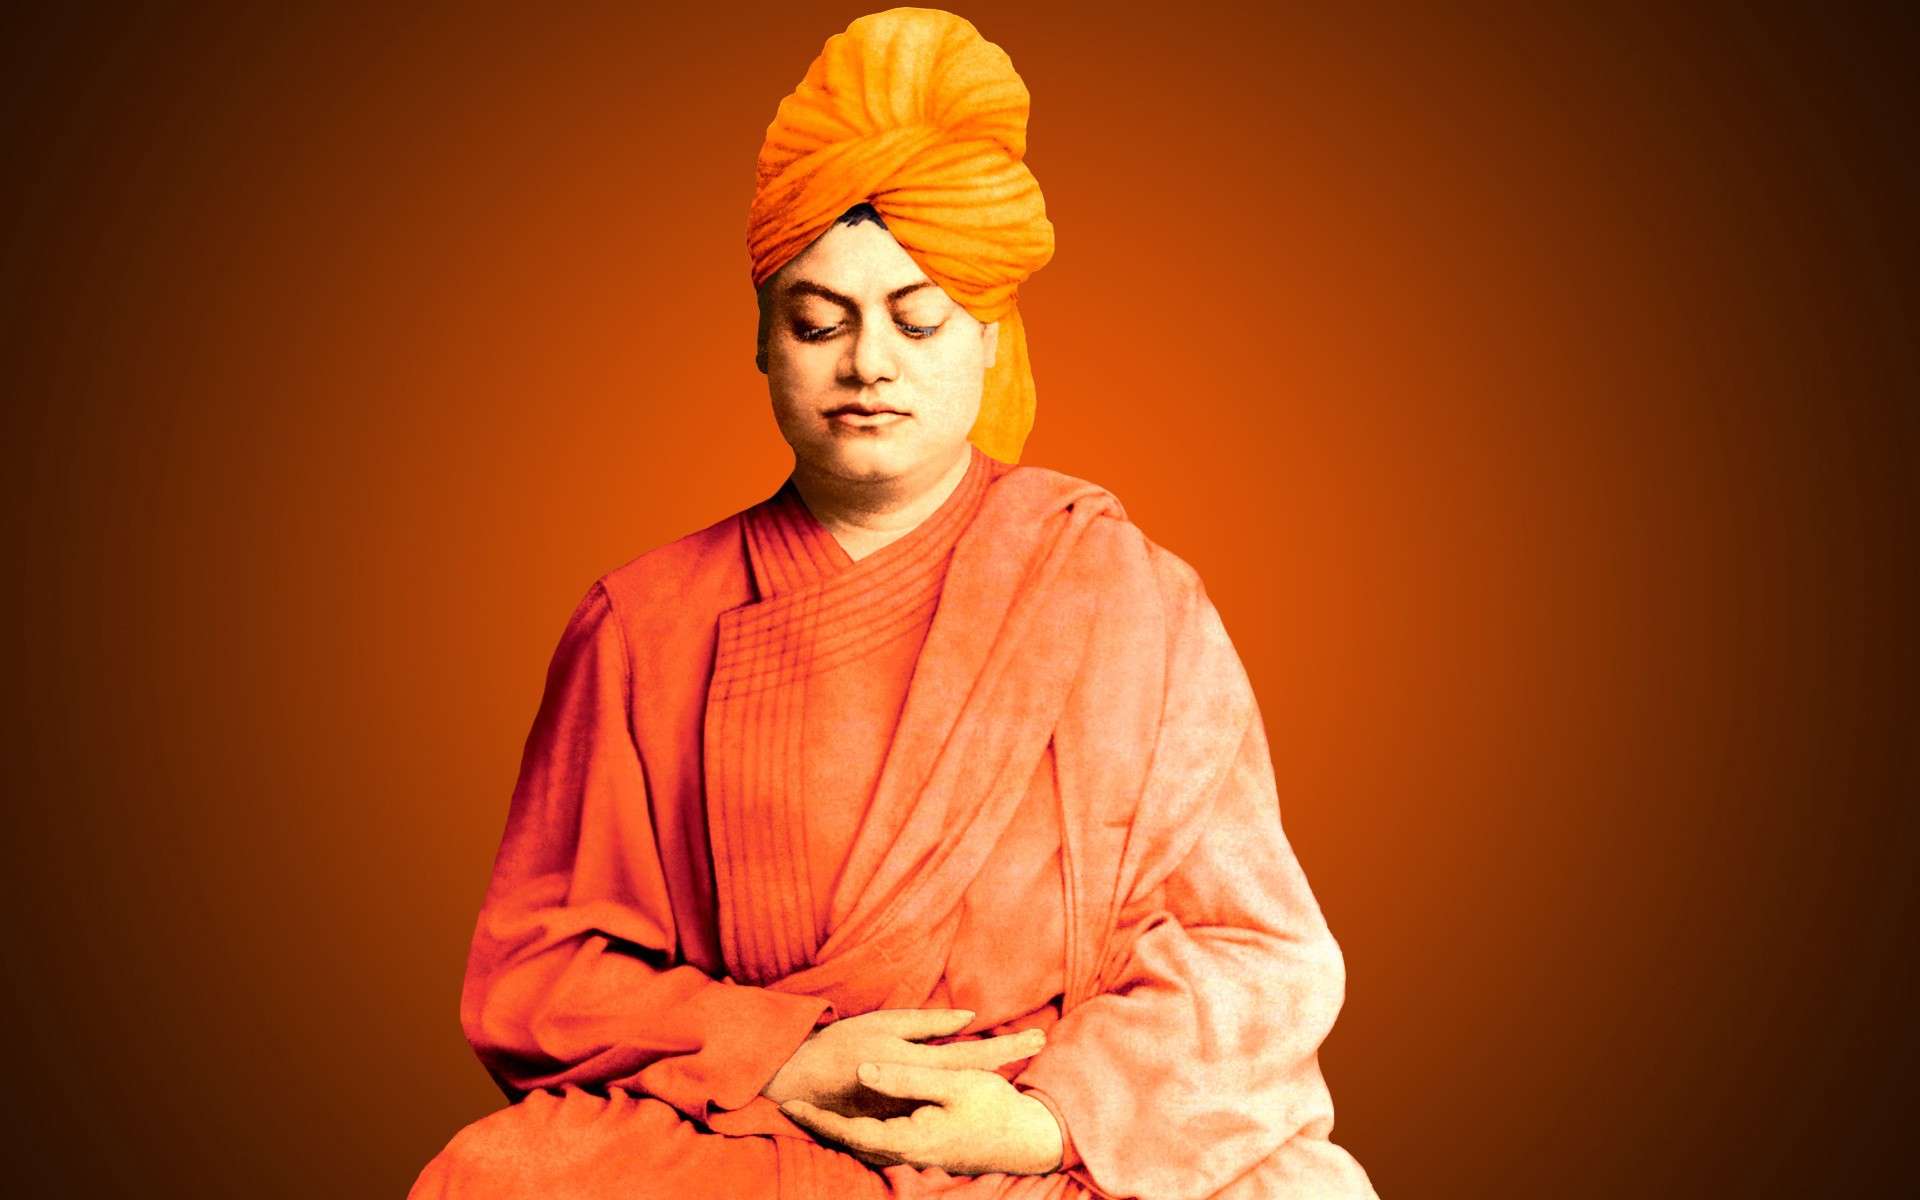 Swami Vivekananda Quotes with Meaning | Business Insider India